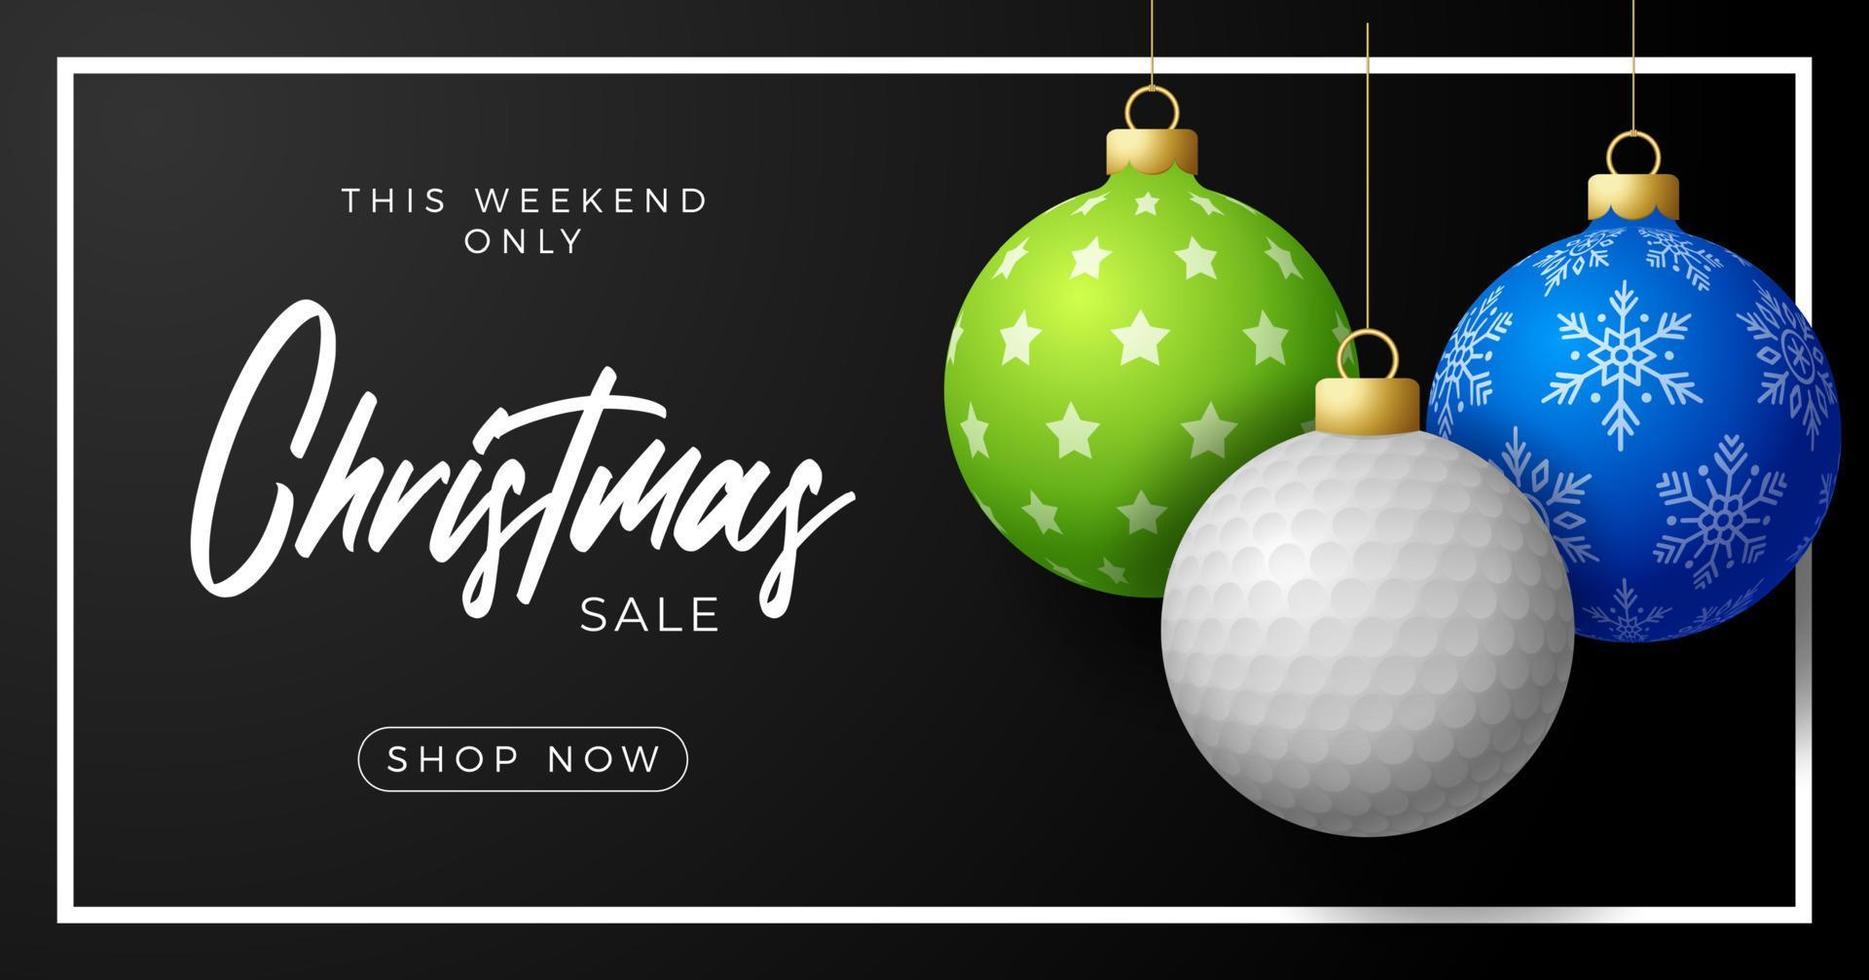 golf Christmas sale banner. Merry Christmas sport greeting card. Hang on a thread golf ball as a xmas ball and colorful bauble on horizontal background. Sport Vector illustration.